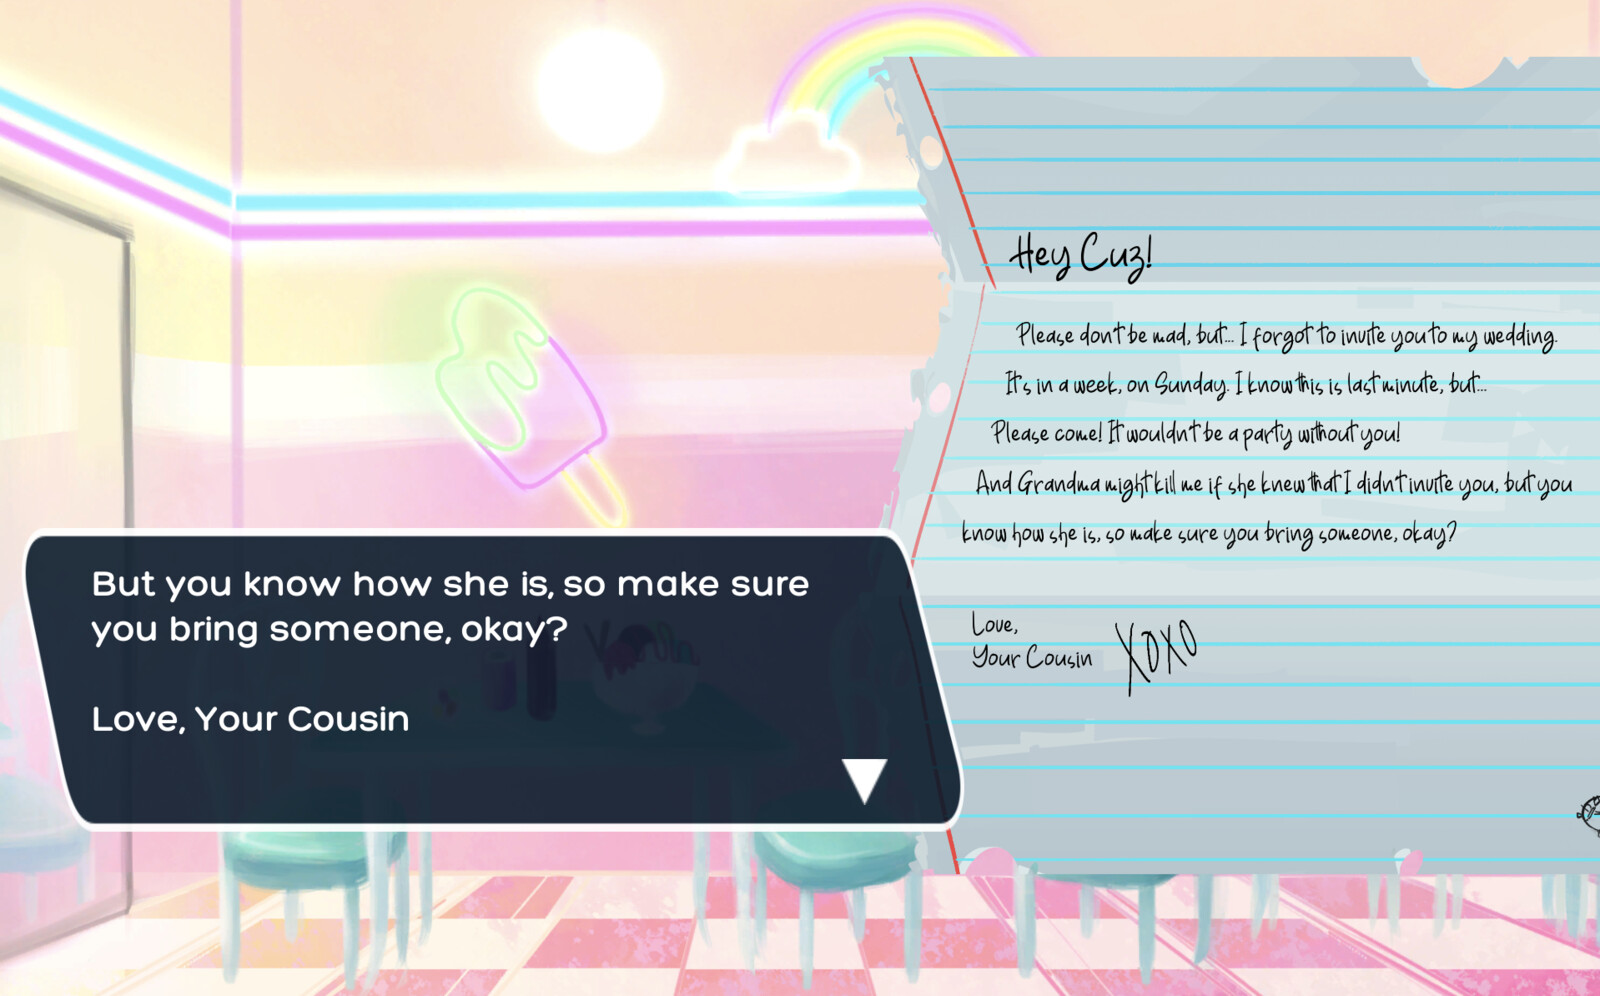 A raggedy letter asset I helped create to convey a certain element of the story